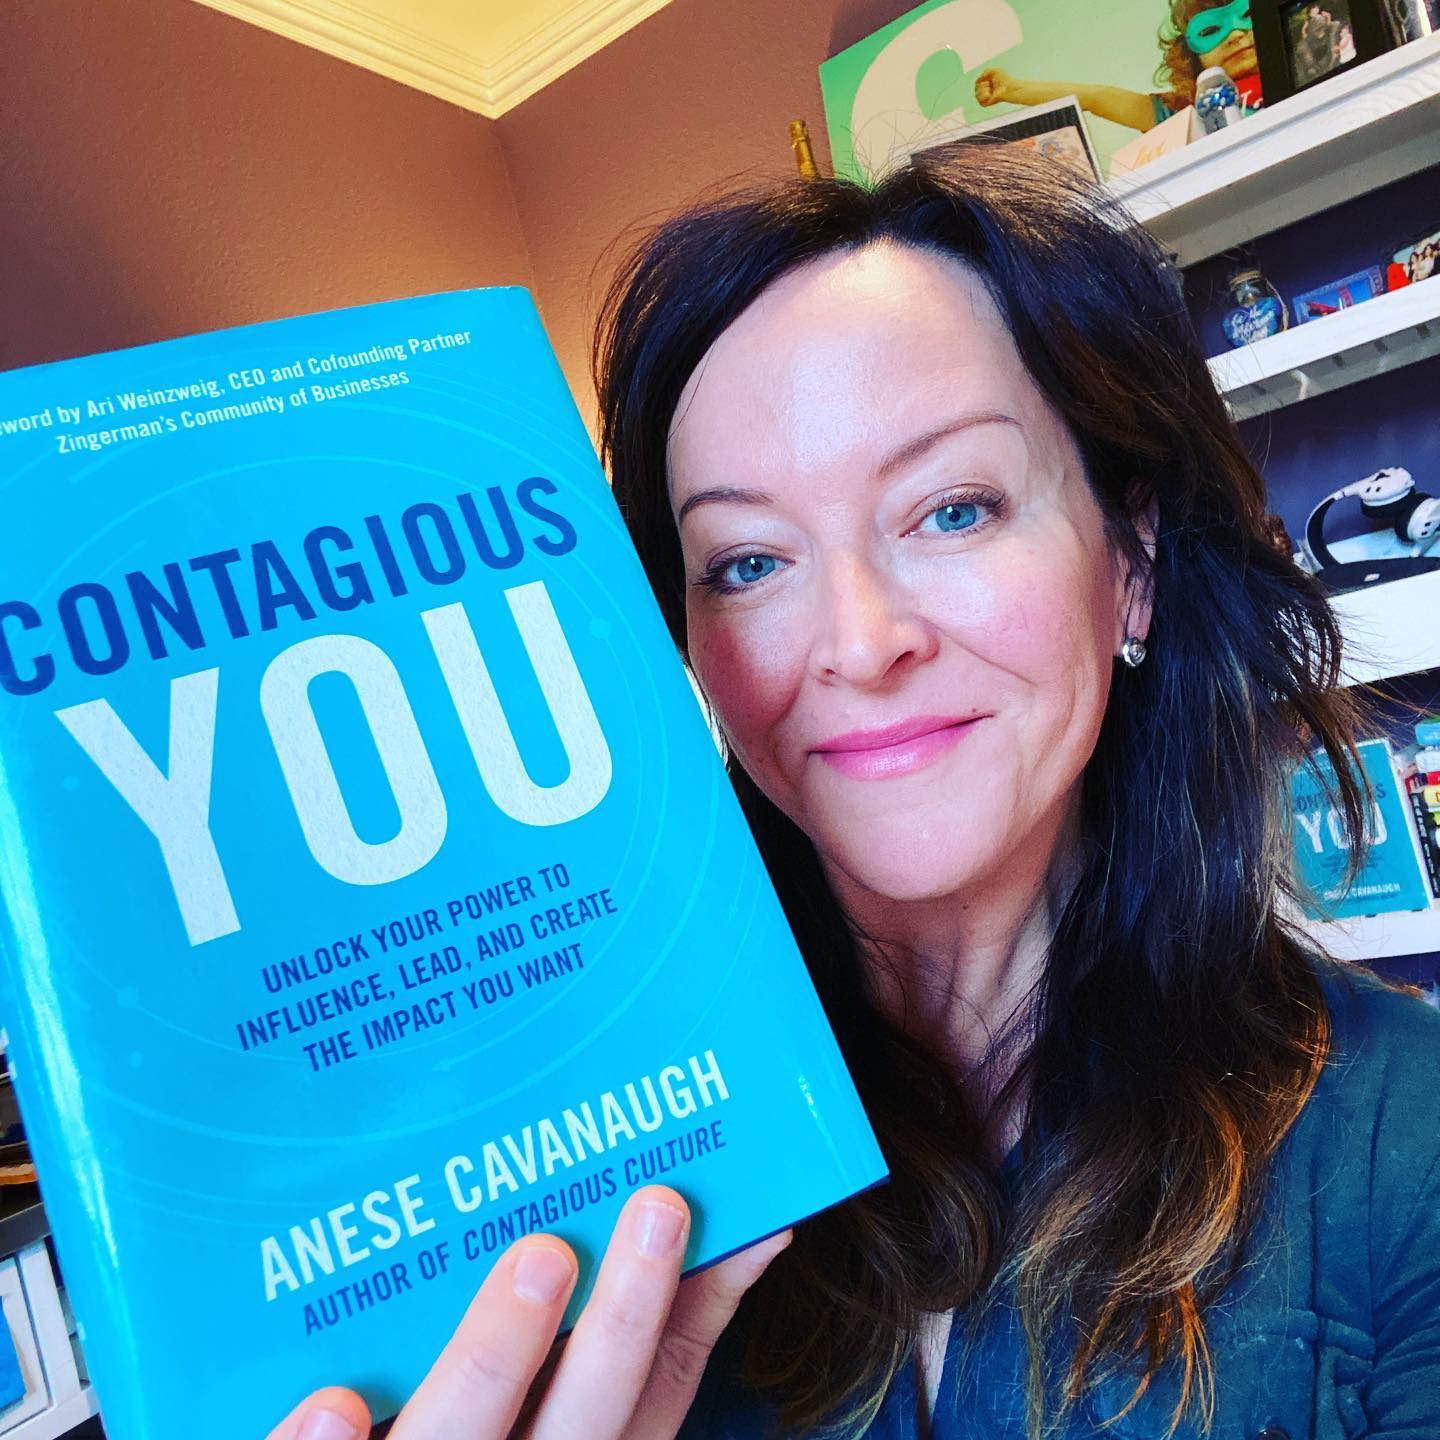 Contagious You Book Held by Anese Cavanaugh